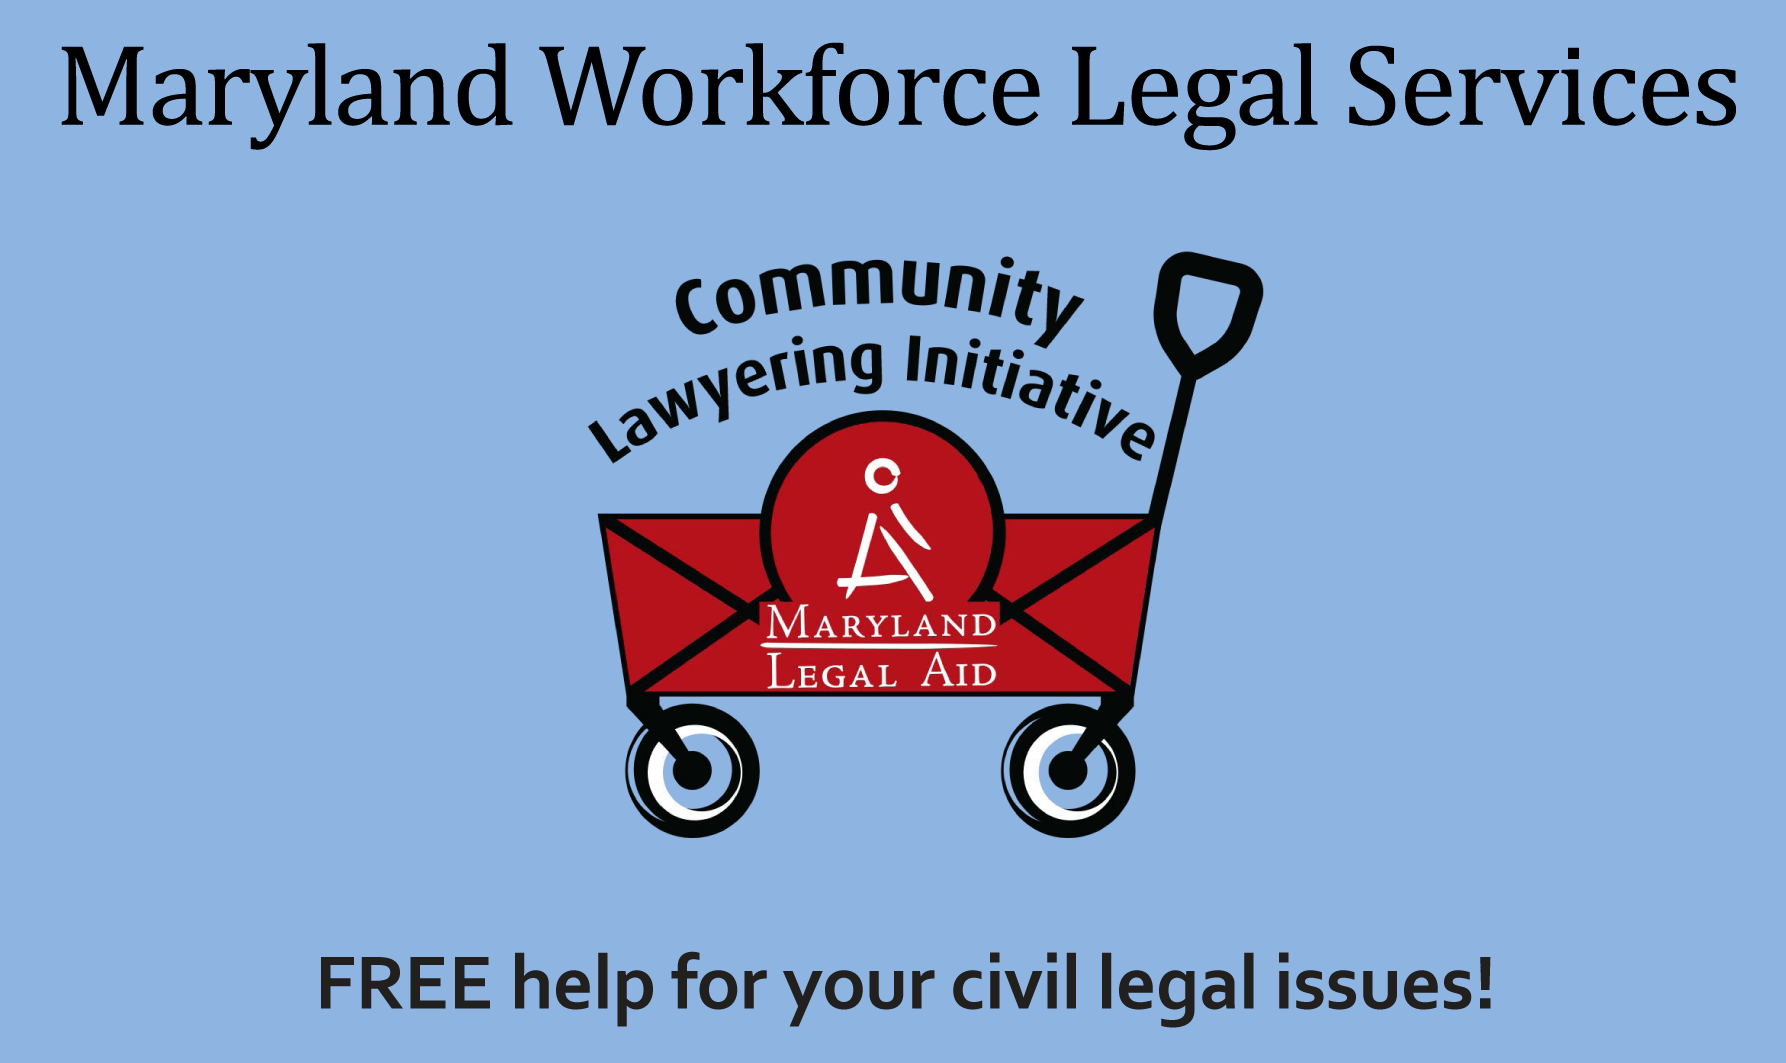 Maryland Workforce Legal Services